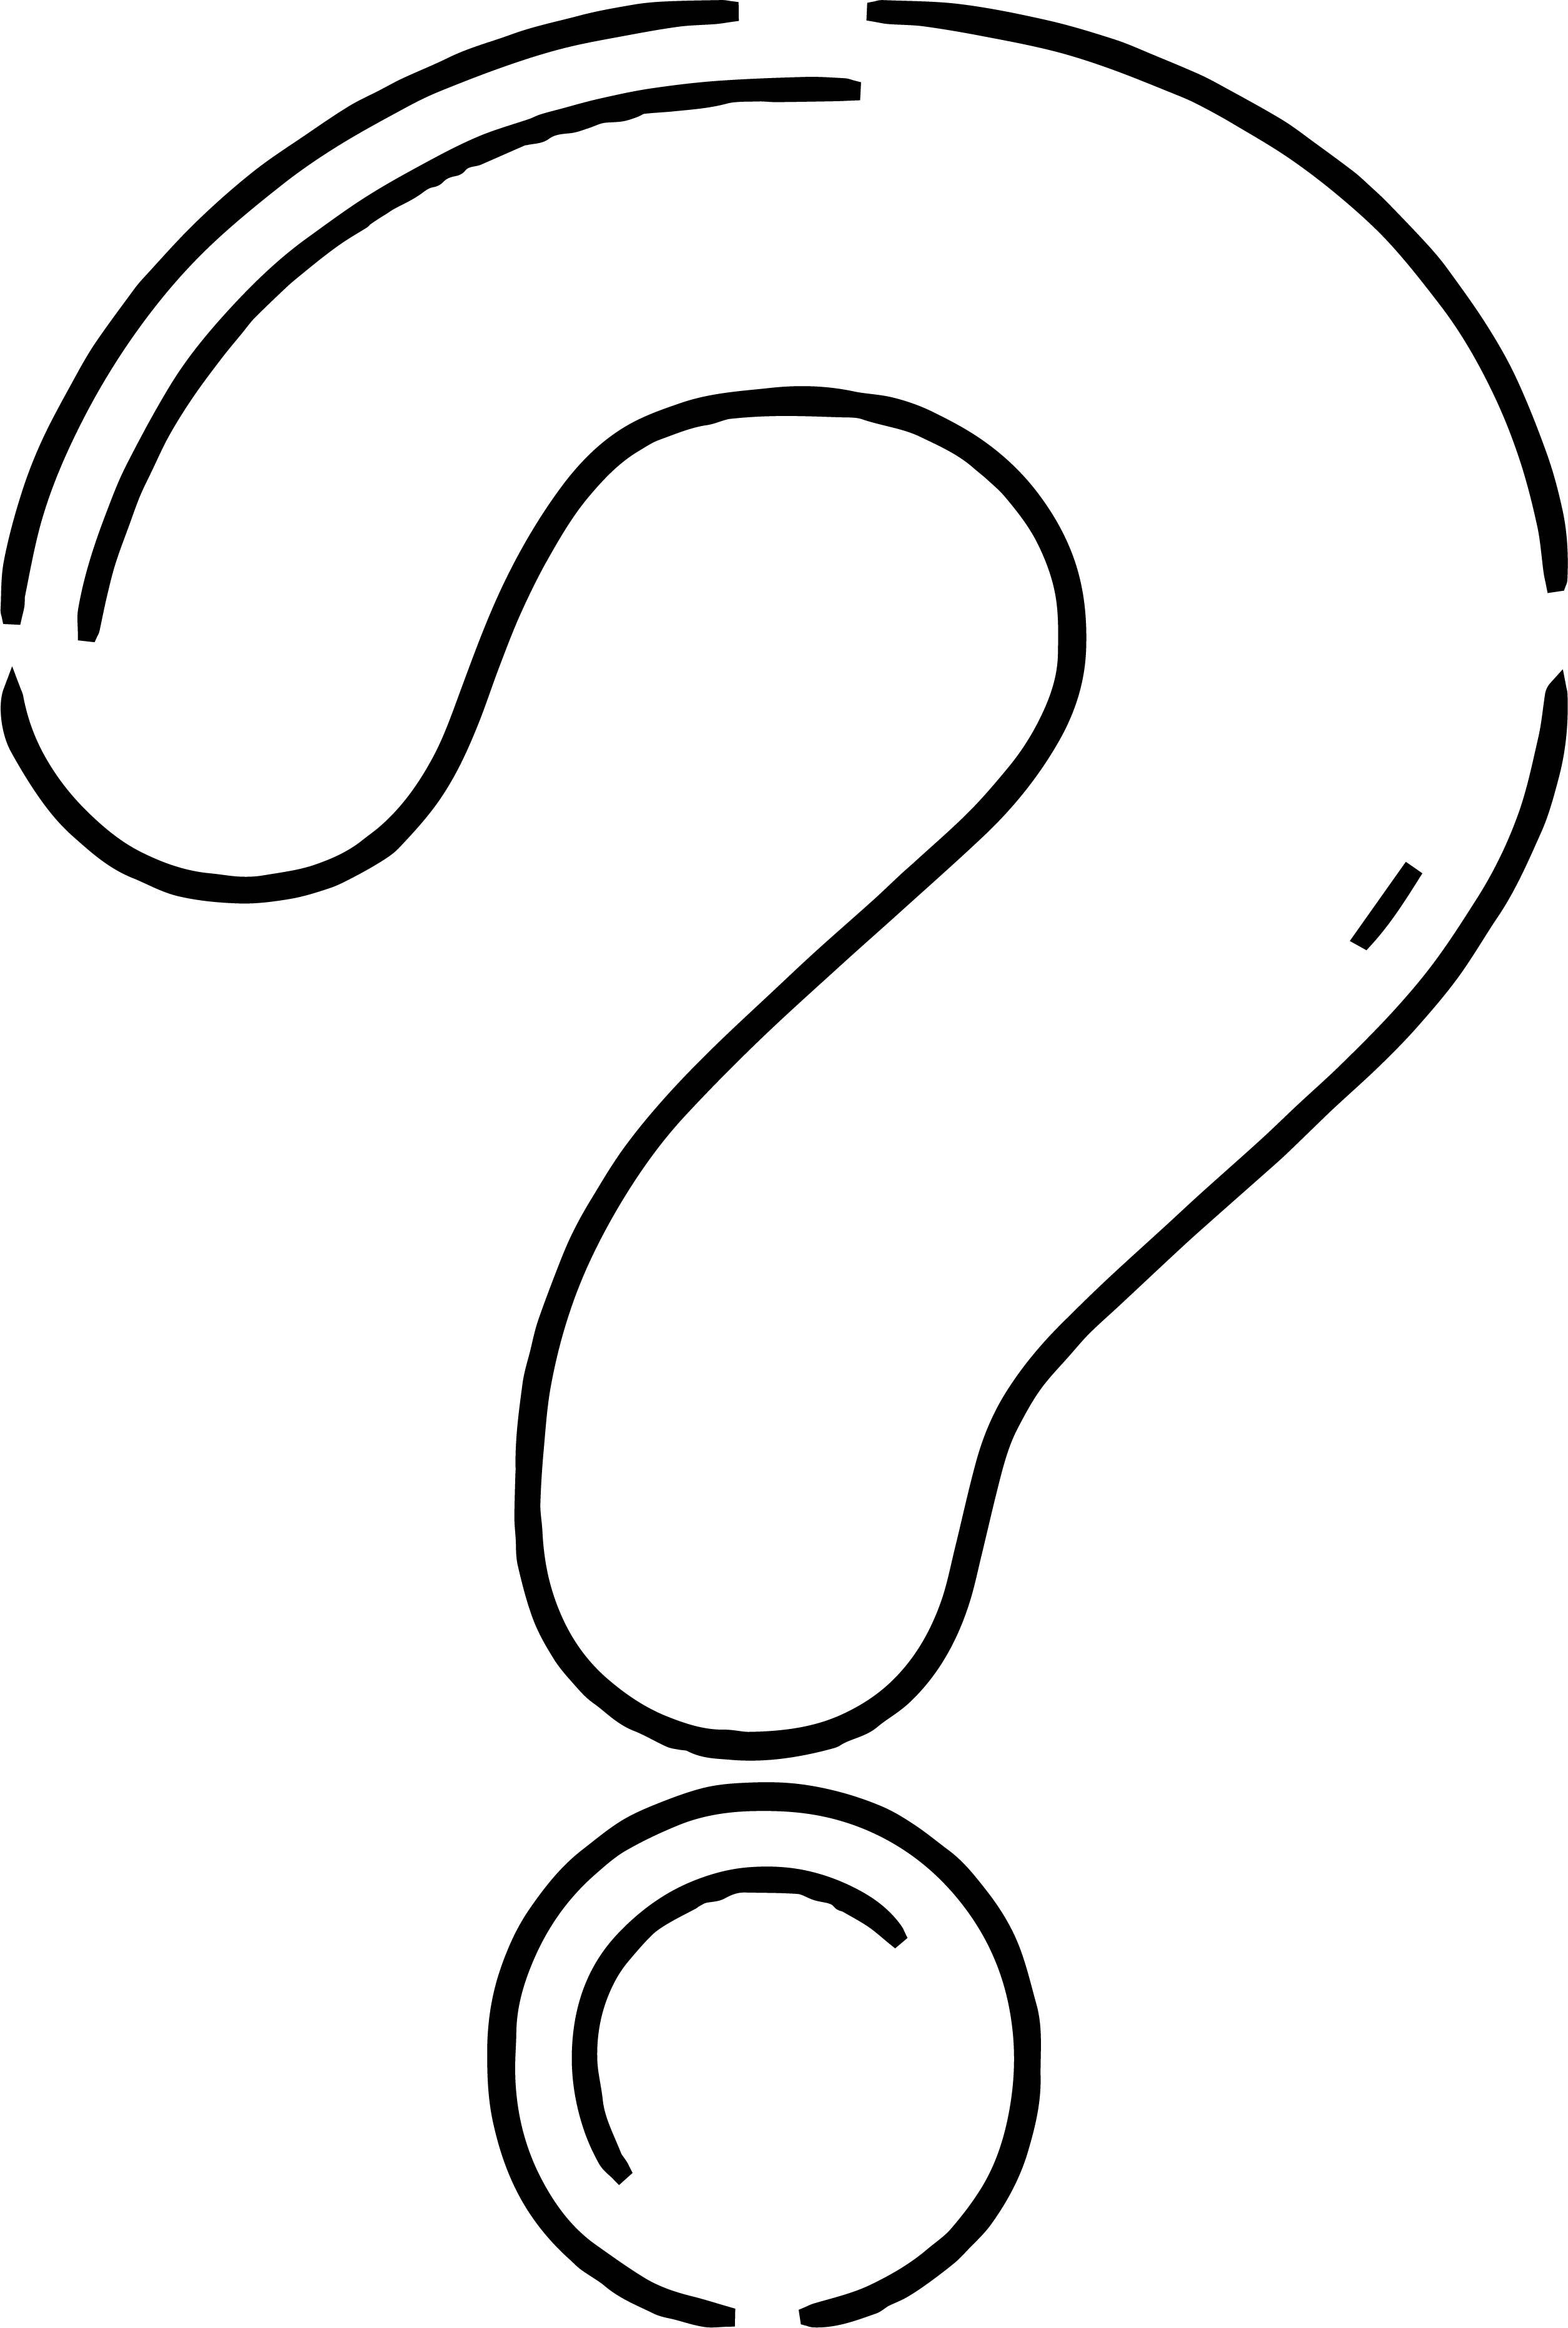 Any question mark coloring page